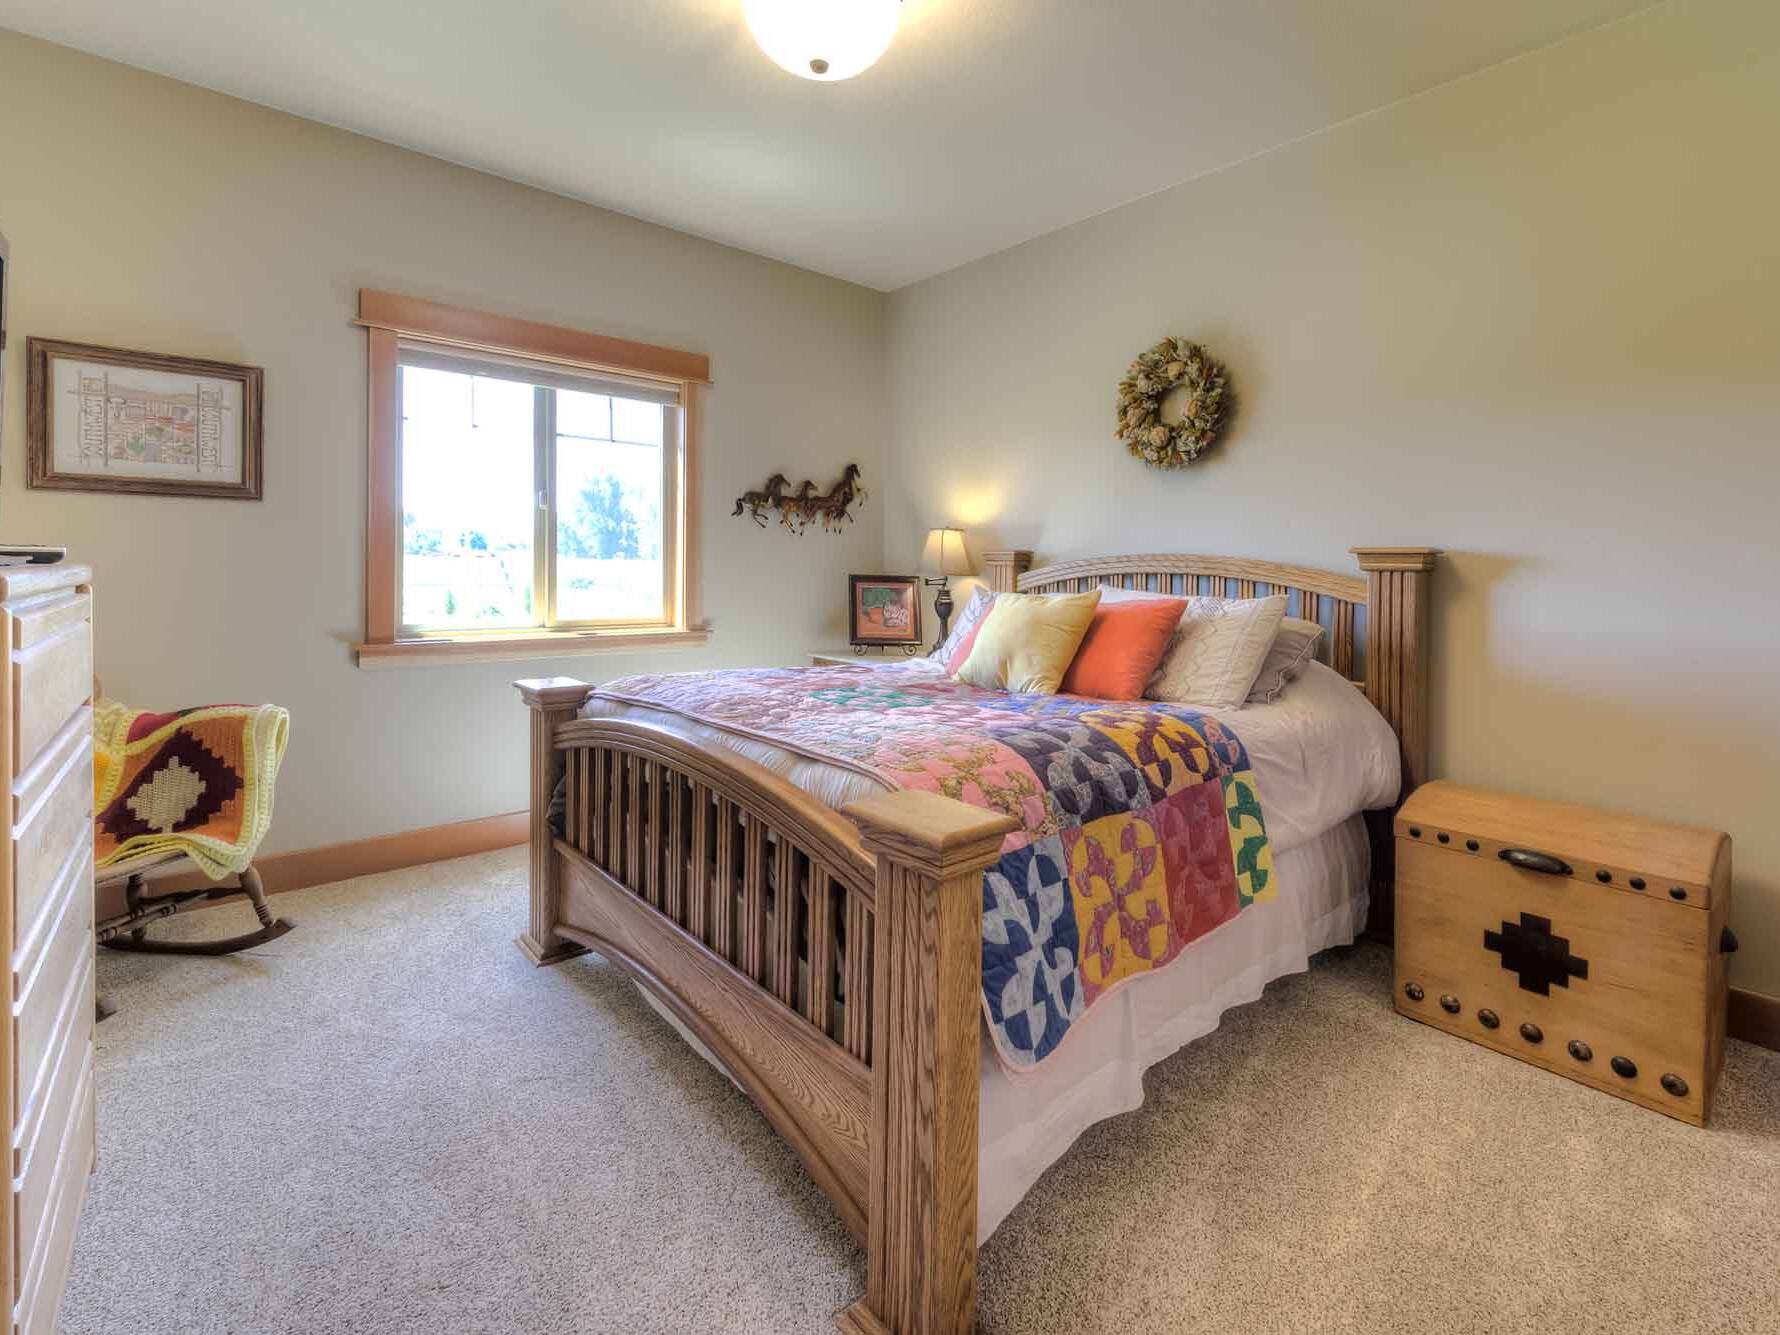 Guest bedroom in a custom home built by Big Sky Builders in Hamilton, Montana